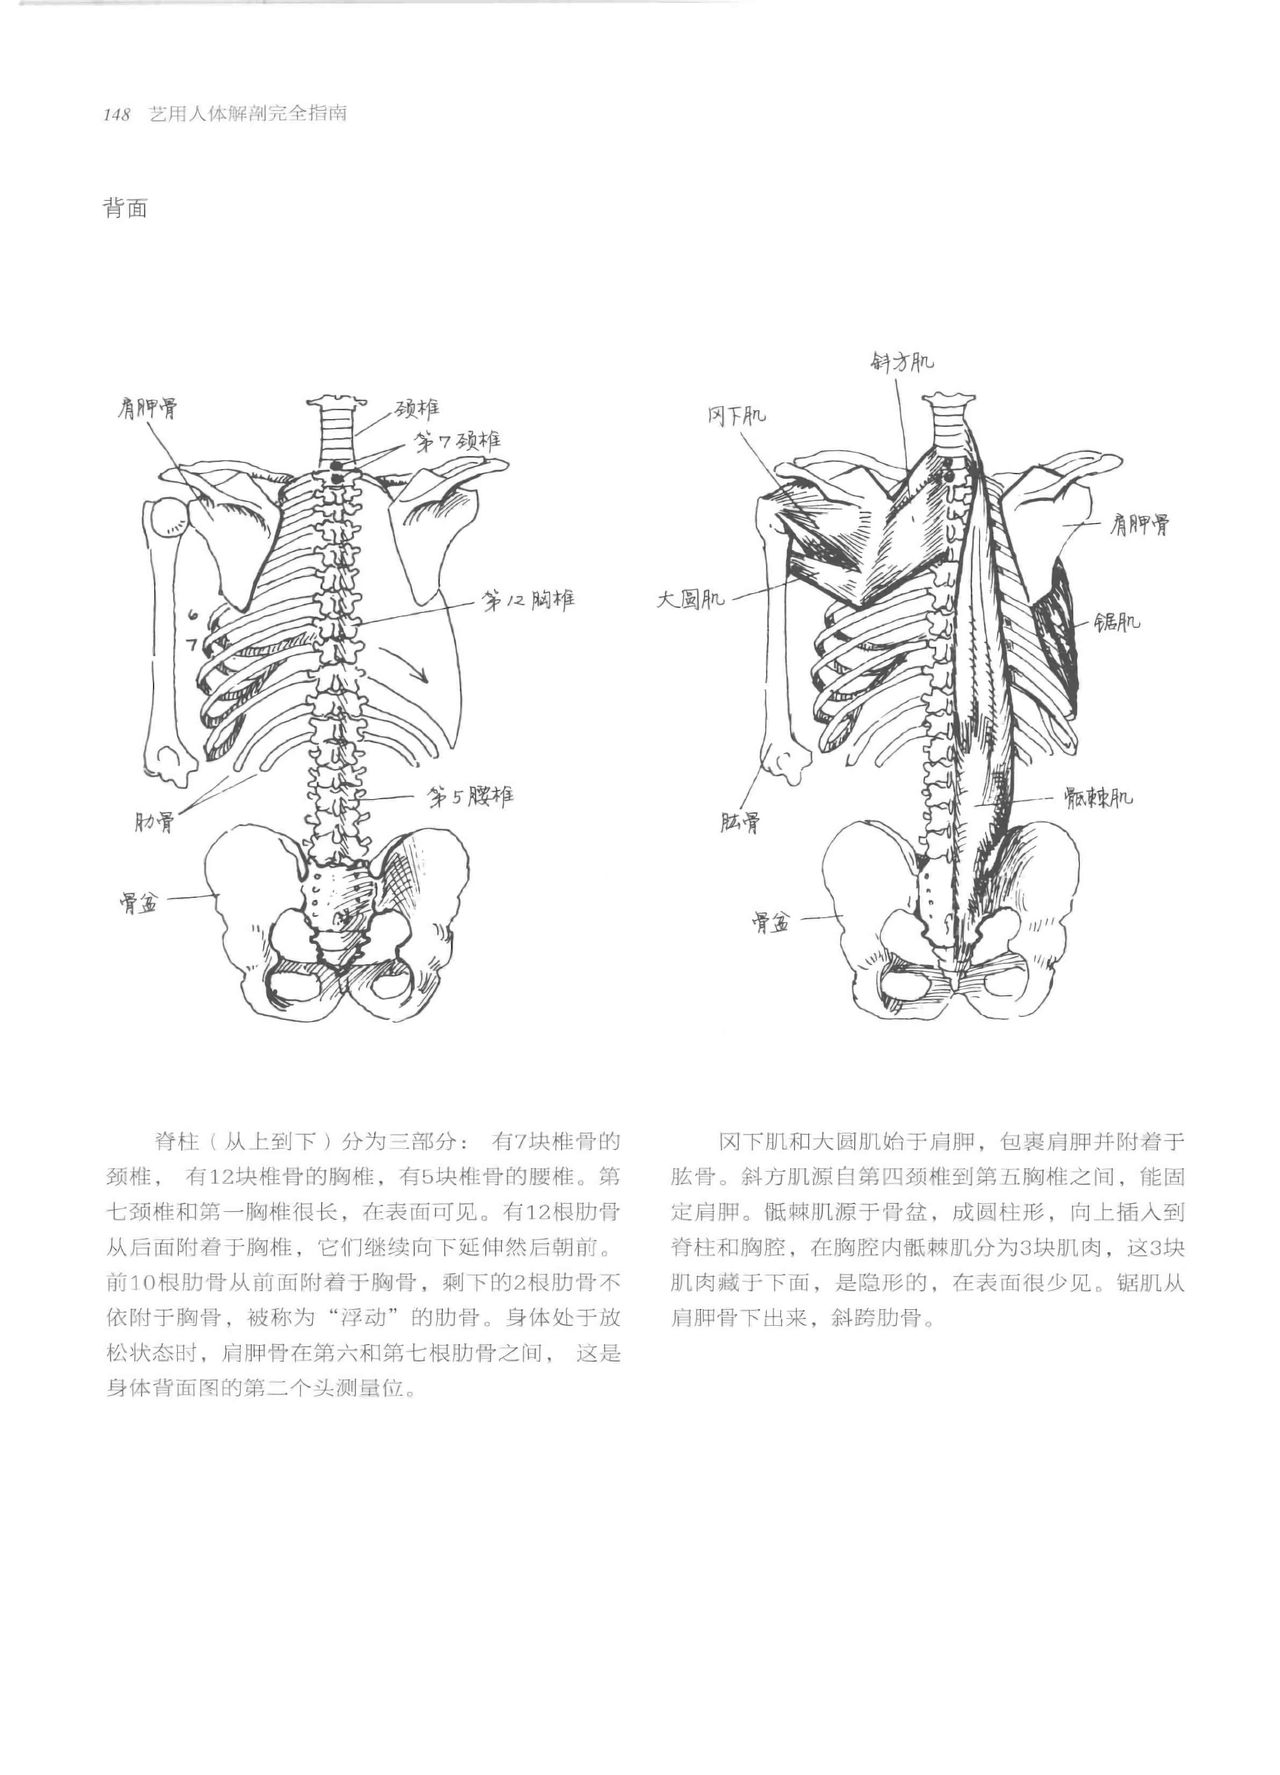 Anatomy-A Complete Guide for Artists - Joseph Sheppard [Chinese] 148